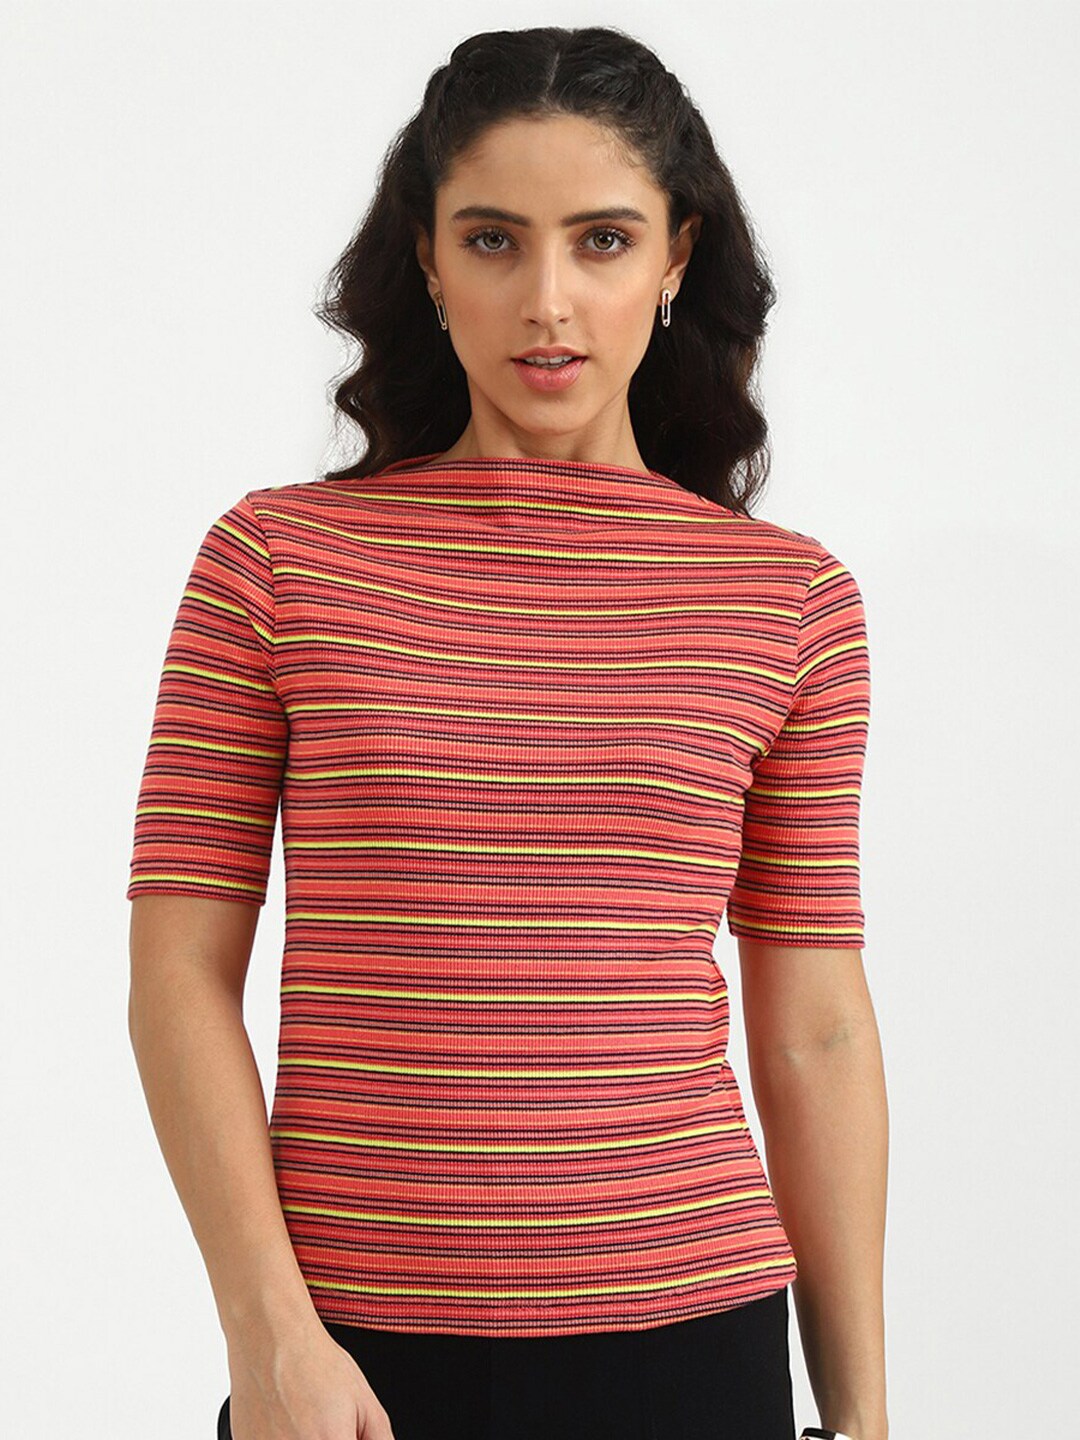 United Colors of Benetton Women Pink & Yellow Pure Cotton Boat Neck Striped Top Price in India